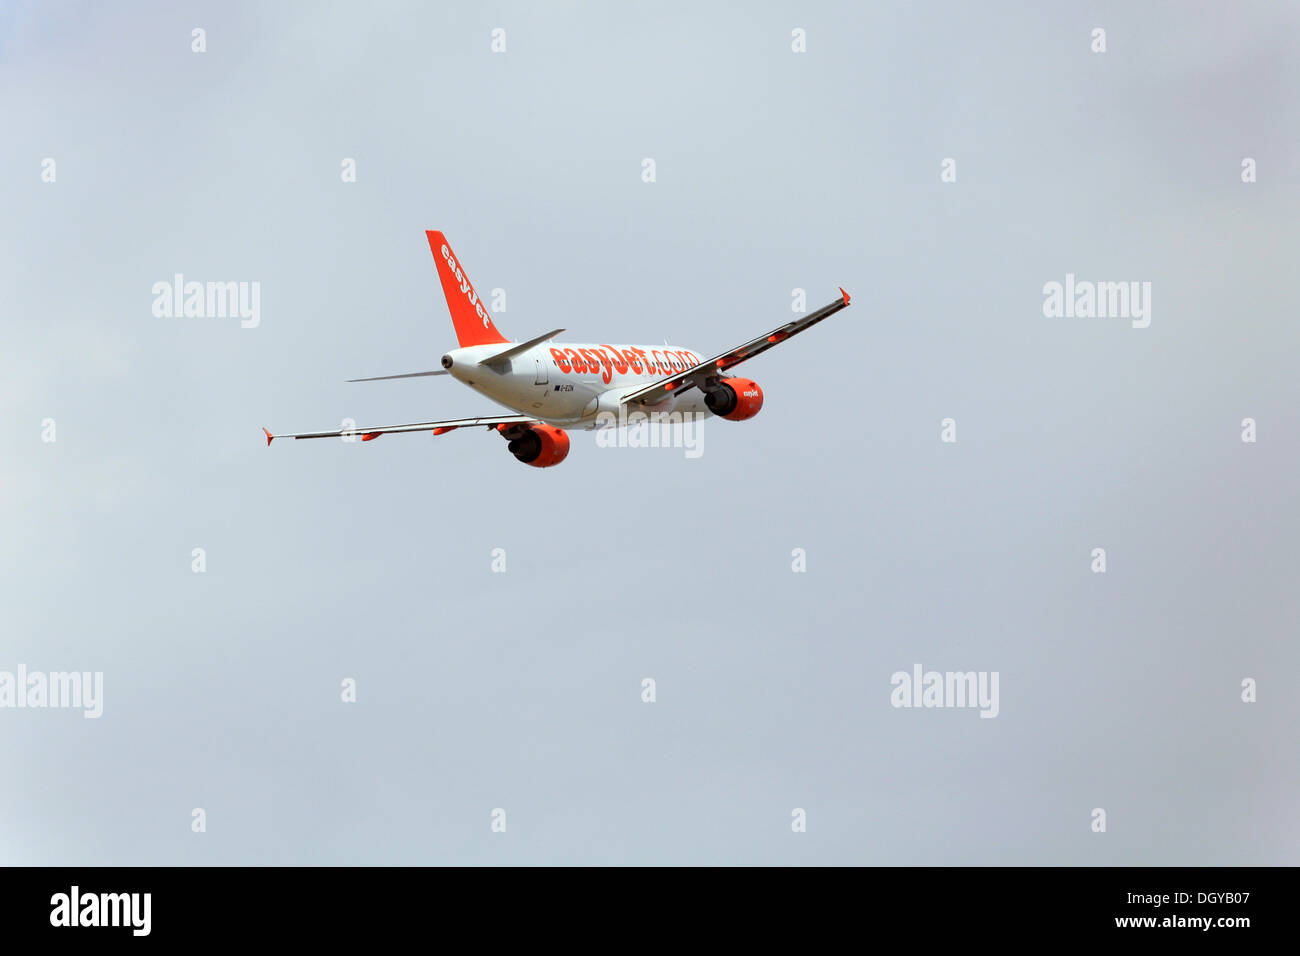 Passenger aircraft Airbus A319 of low-cost airline Easyjet, during climb Stock Photo